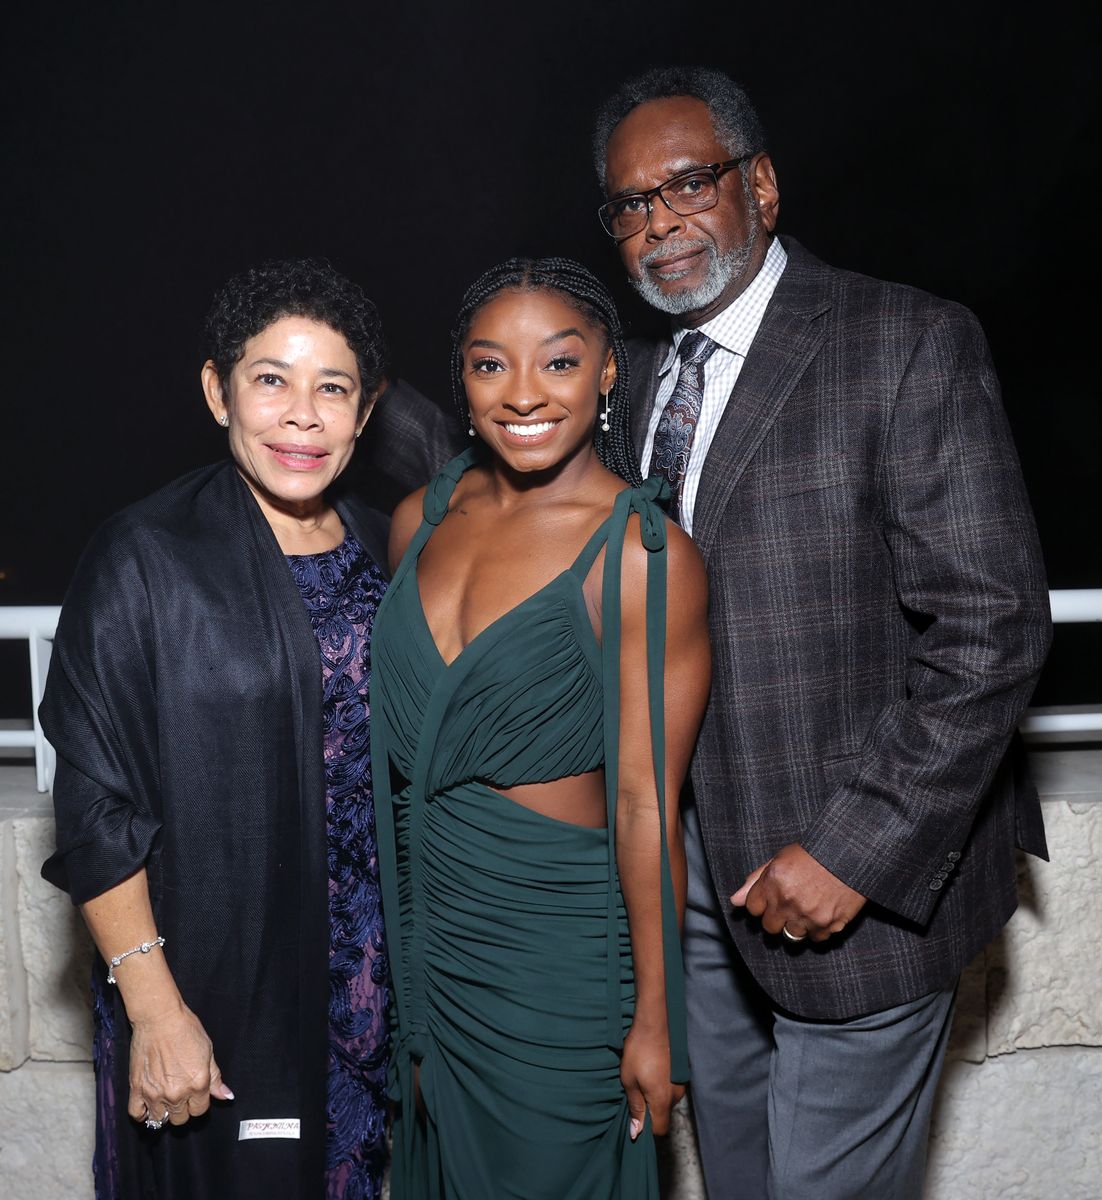 (L-R) Nellie Biles, honoree Simone Biles, and Ronald Biles attend the 2021 InStyle Awards at The Getty Center on November 15, 2021 in Los Angeles, California.